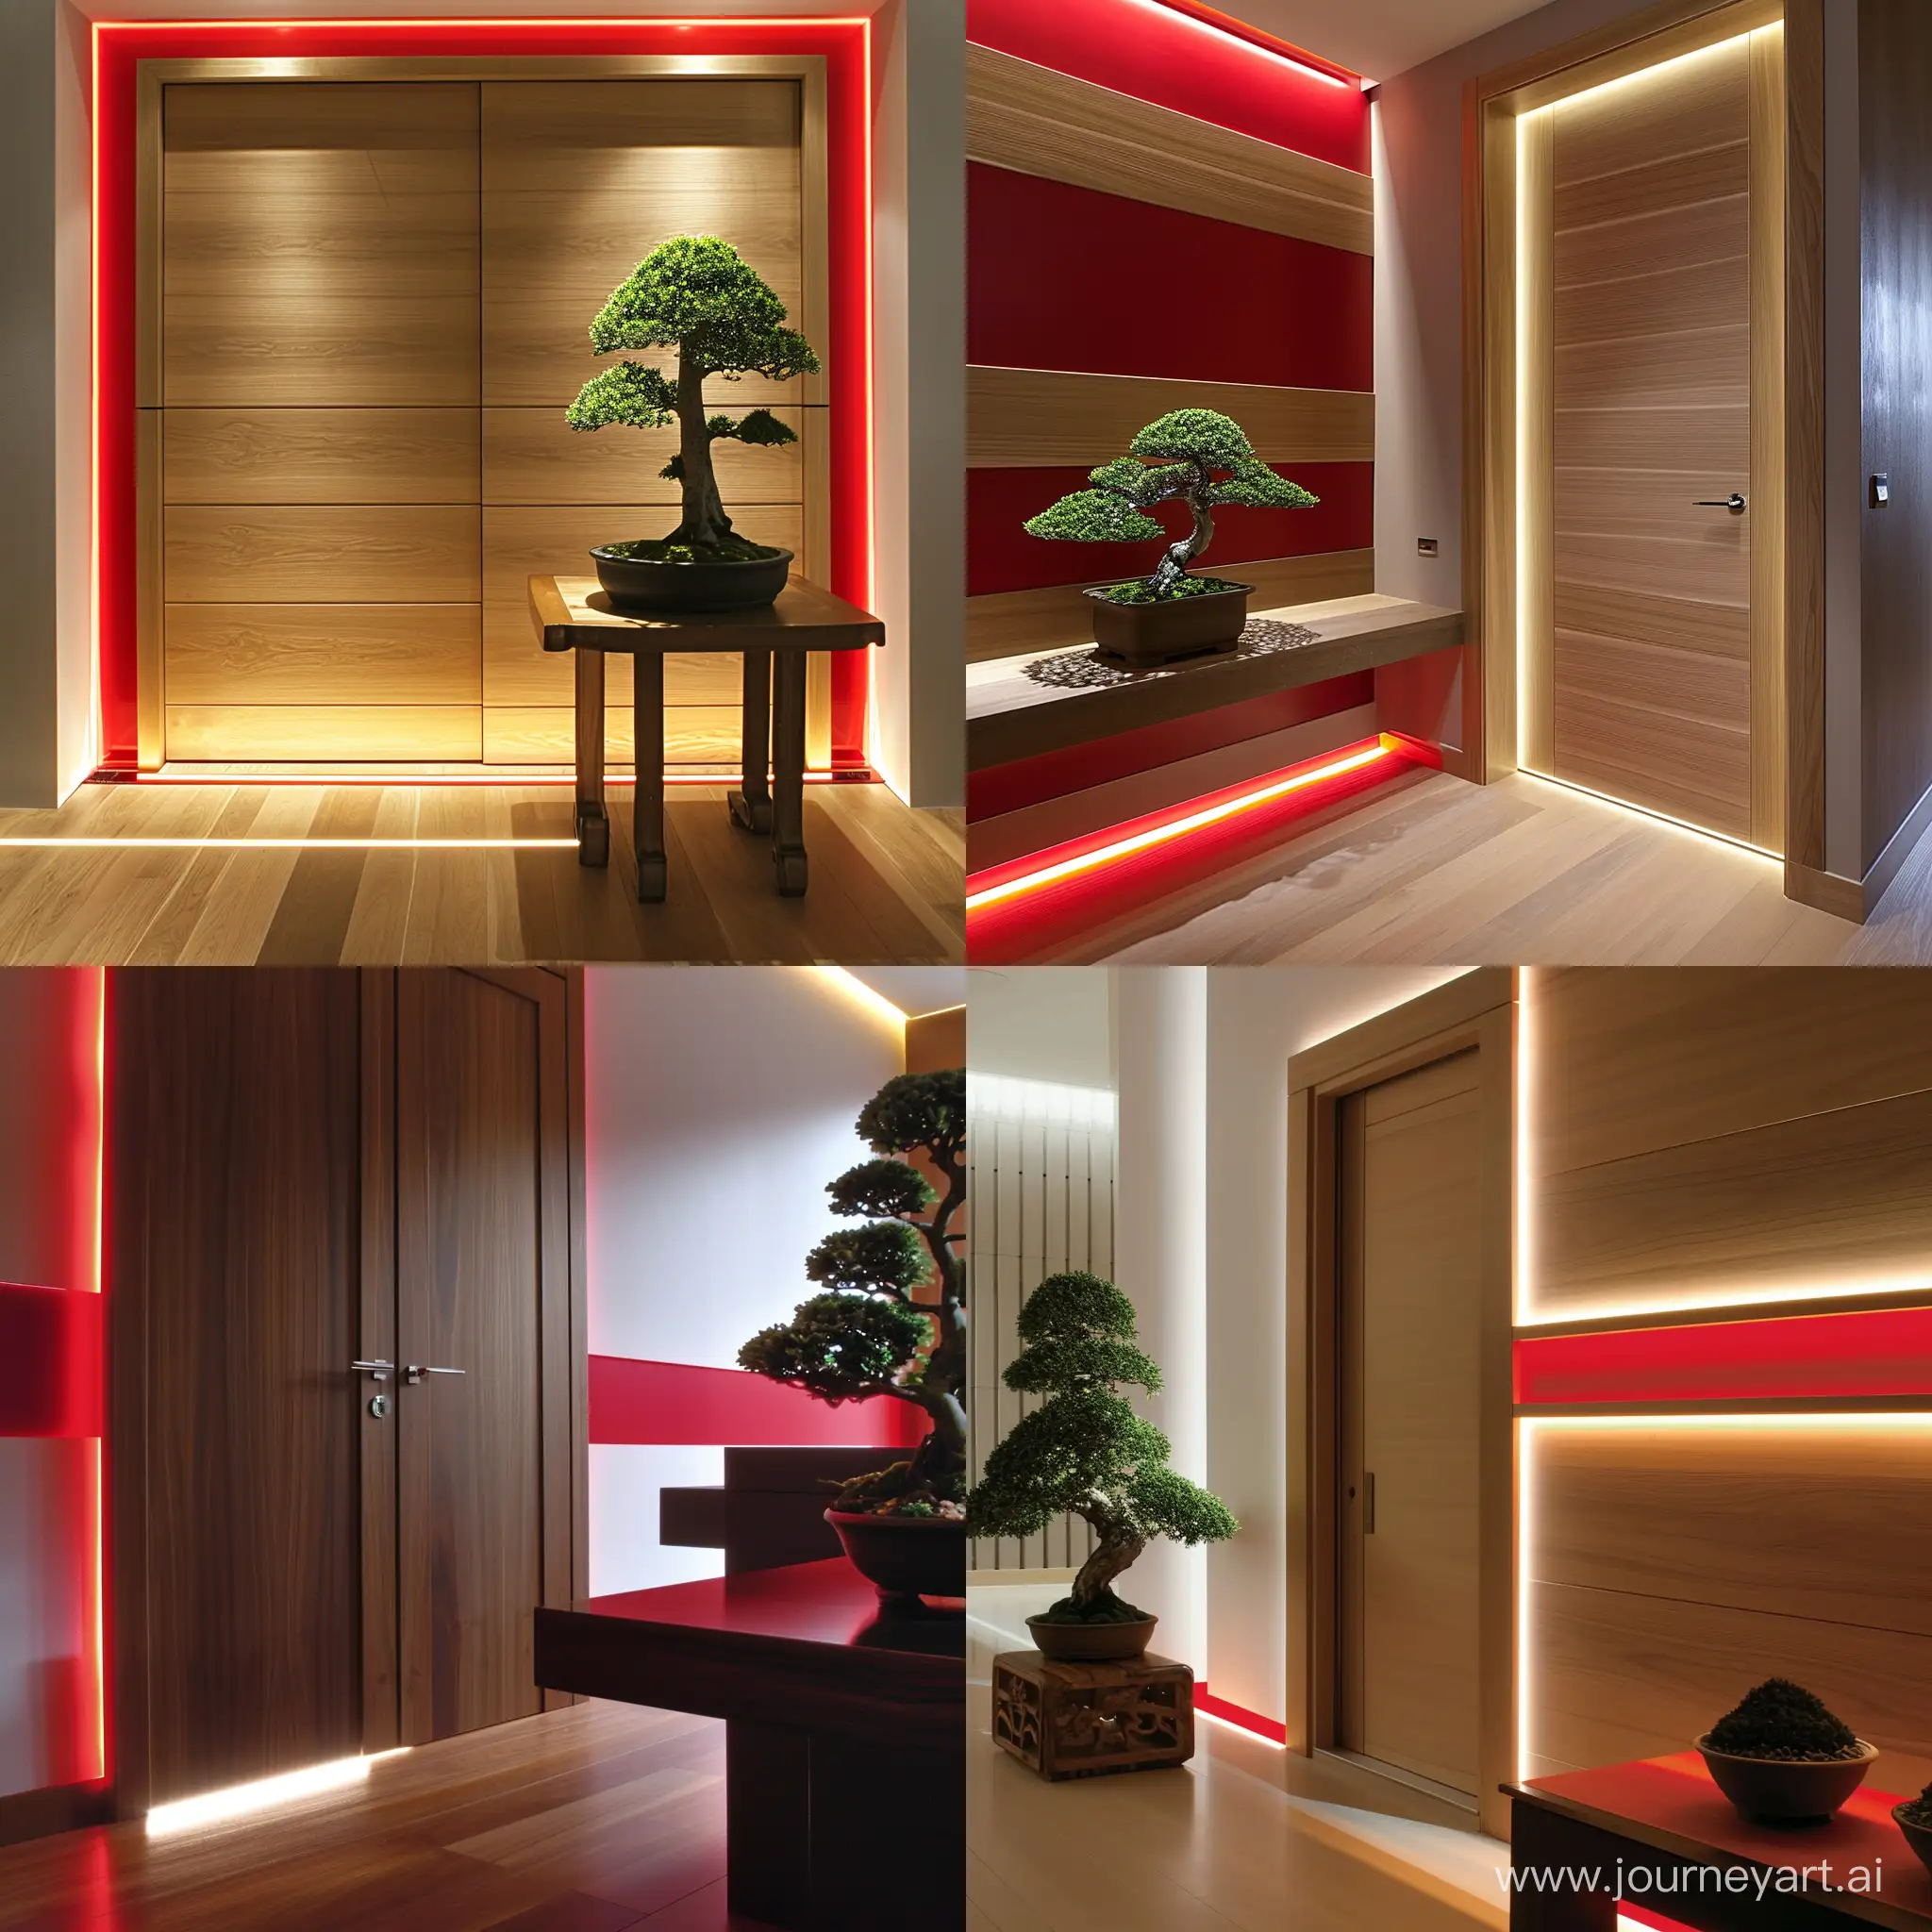 Modern doors with  custom cherry veneer and led light underneath. Photo is take in modern room with asian style  neat, red stripe on wall and  some bonsai tree on table